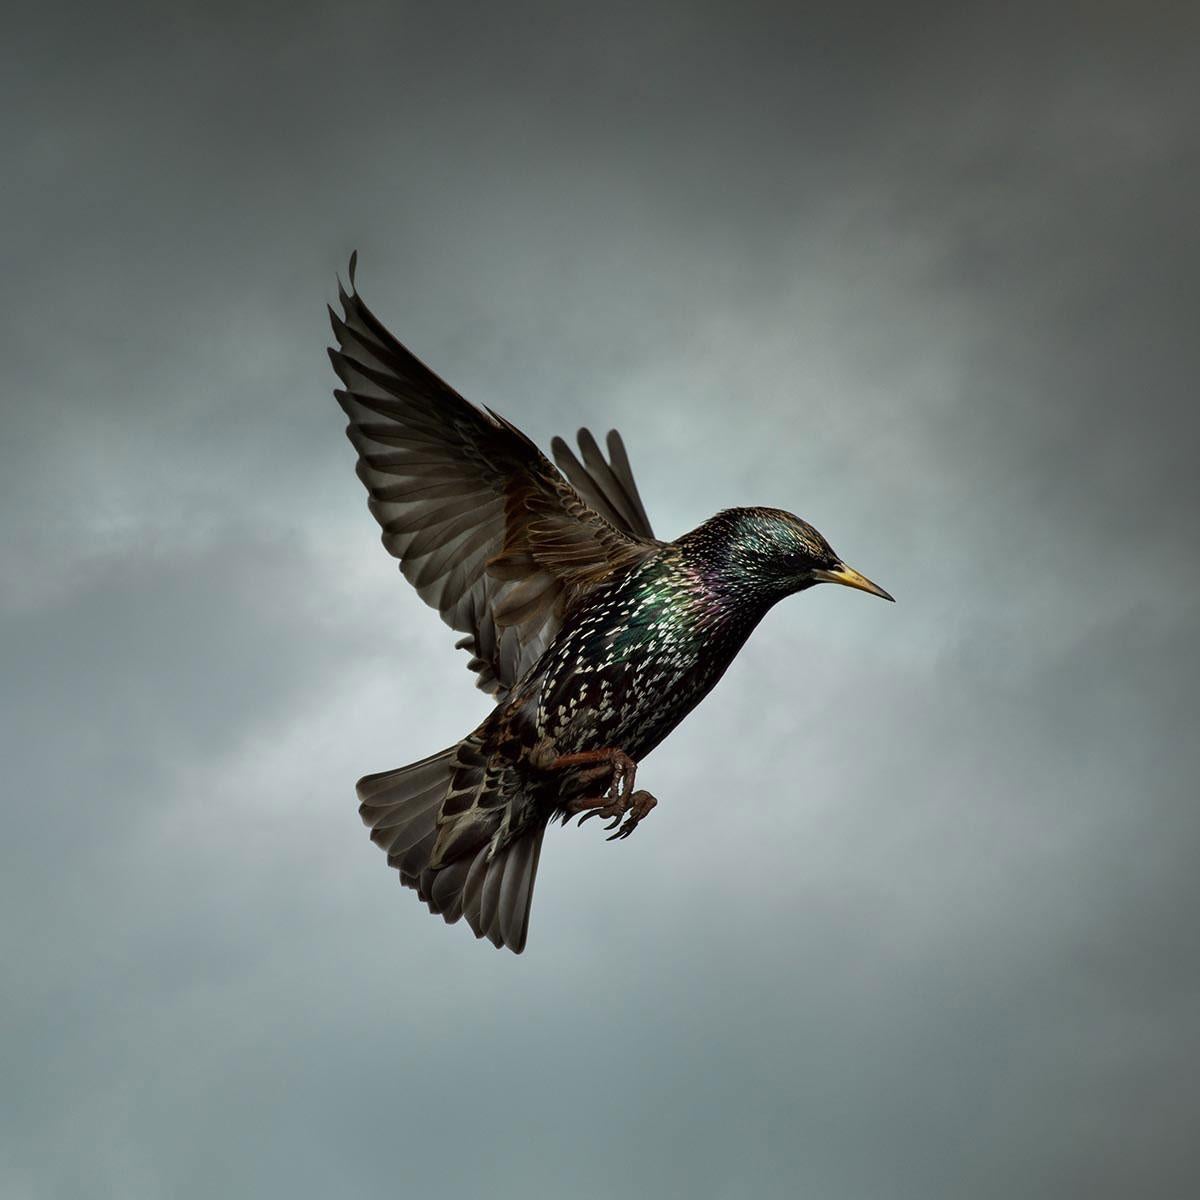 Starling by Mark Harvey 30" x 30" C-type Photographic Print Only